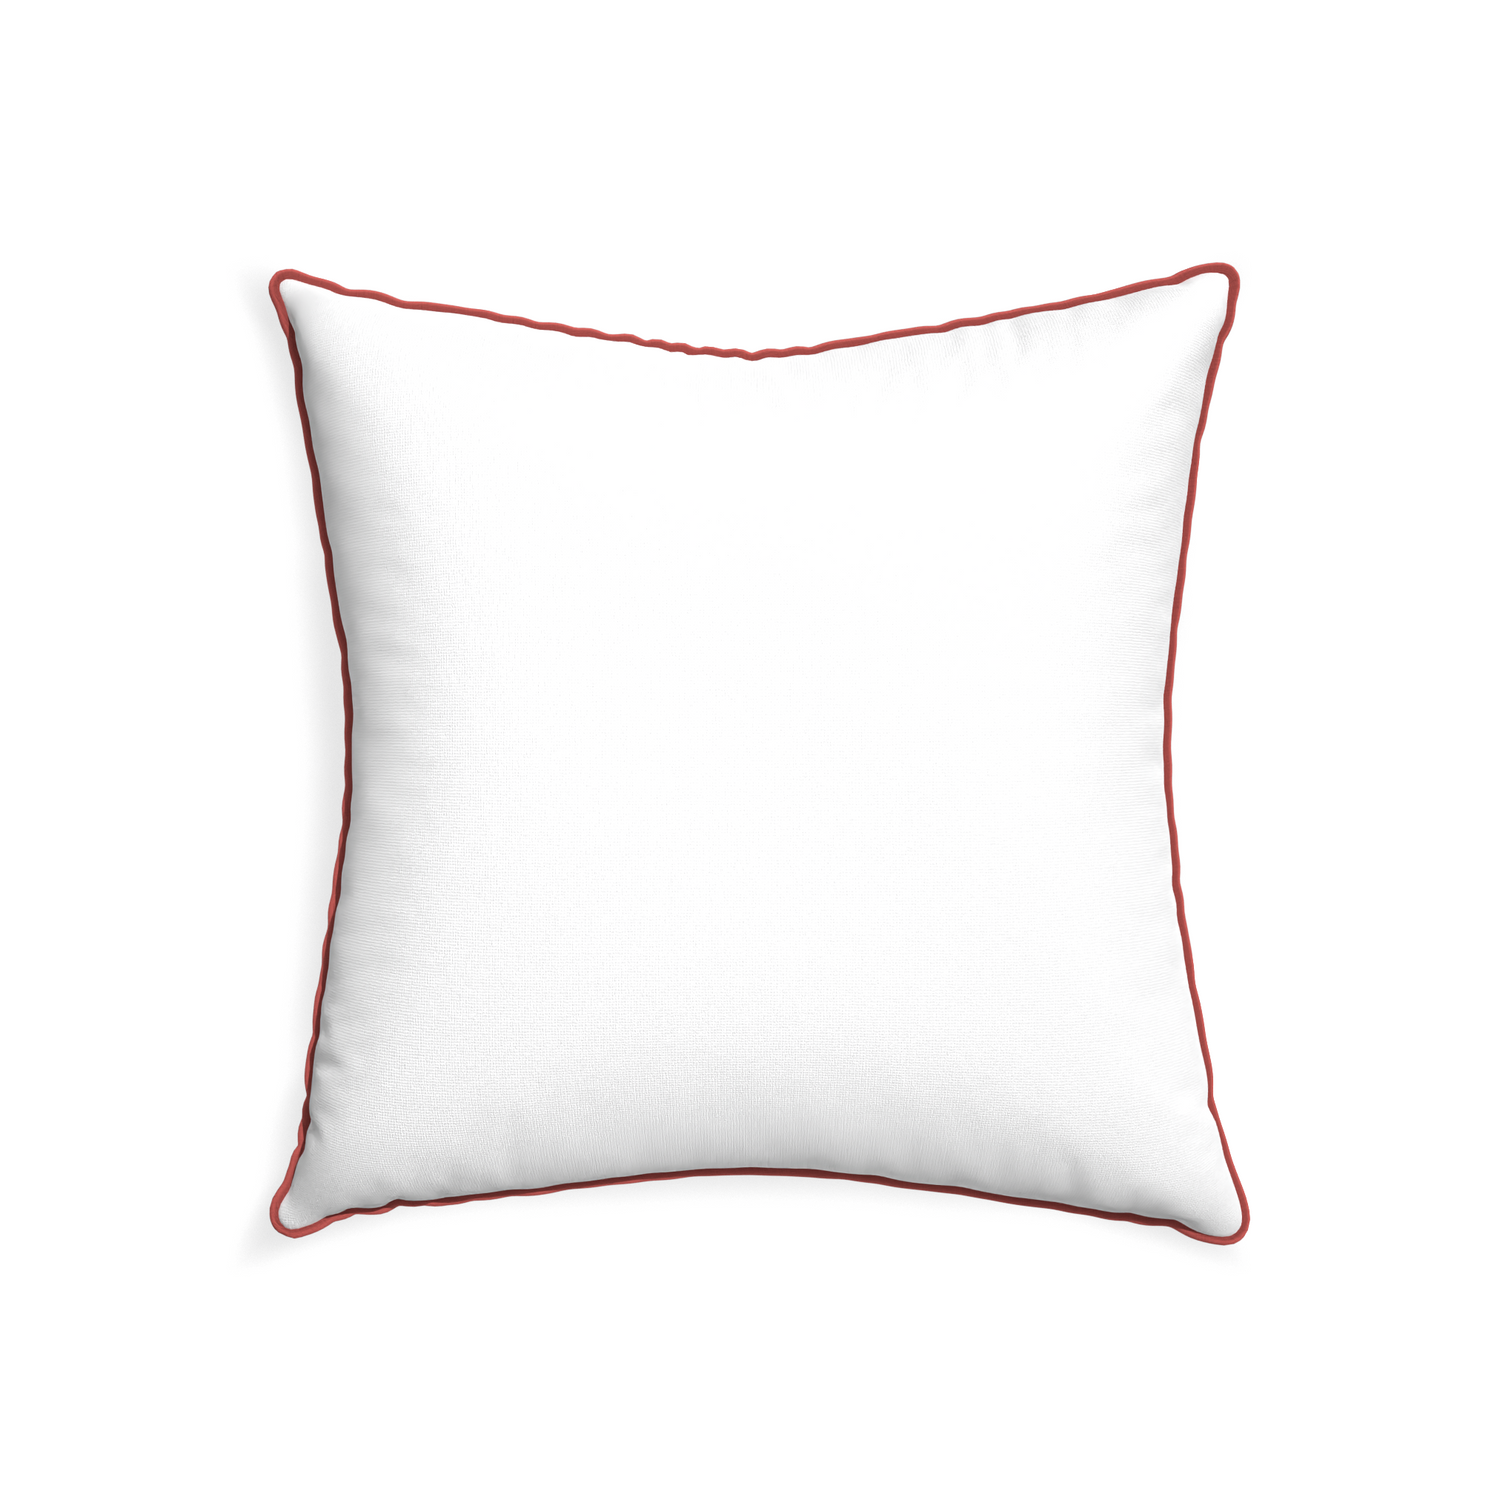 22-square snow custom pillow with c piping on white background